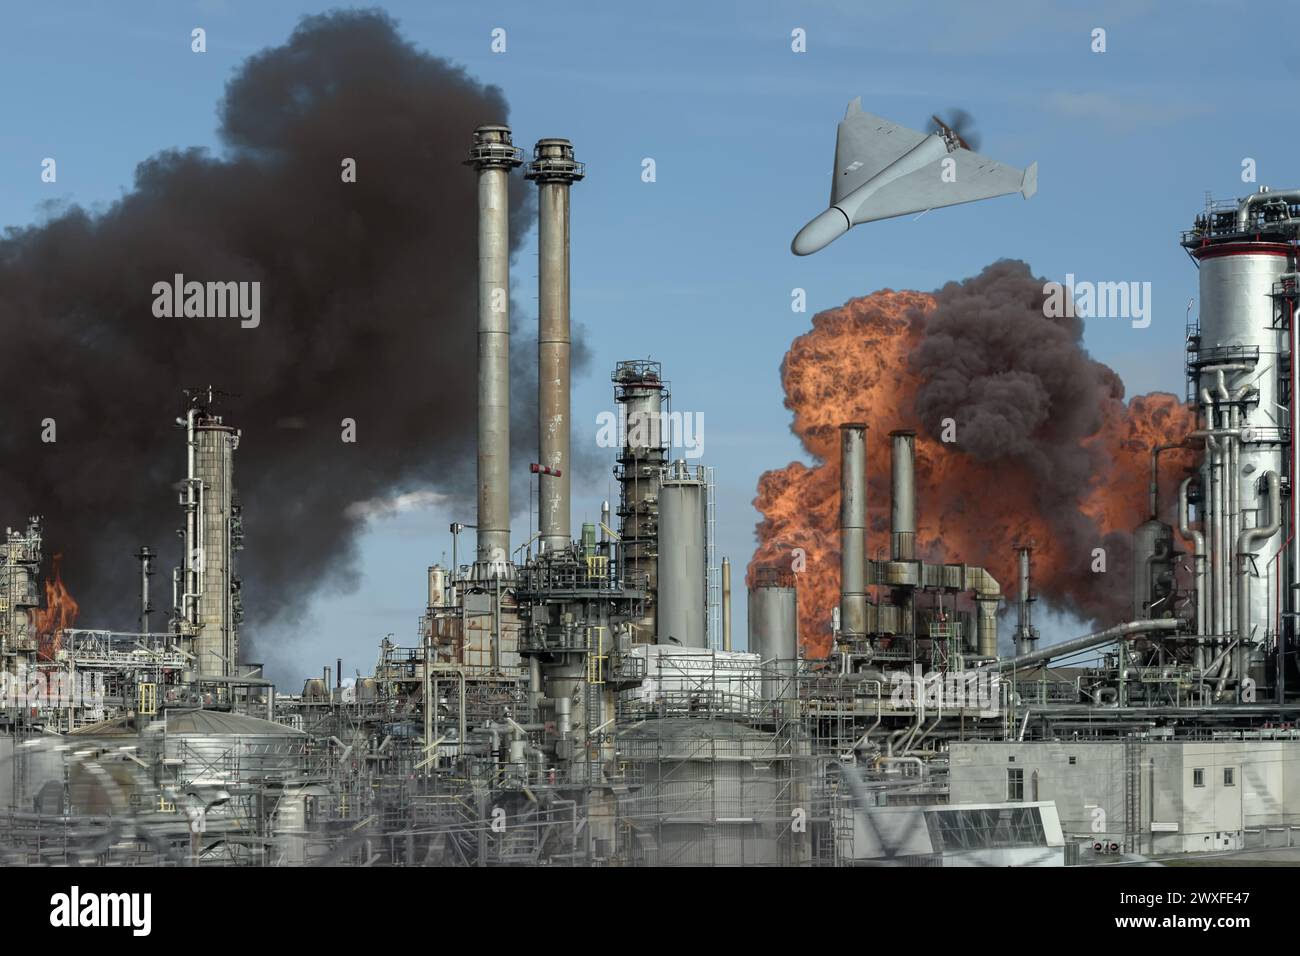 an unmanned drone attacks an oil depot, oil burns and smokes, a fire at an oil refinery. Stock Photo